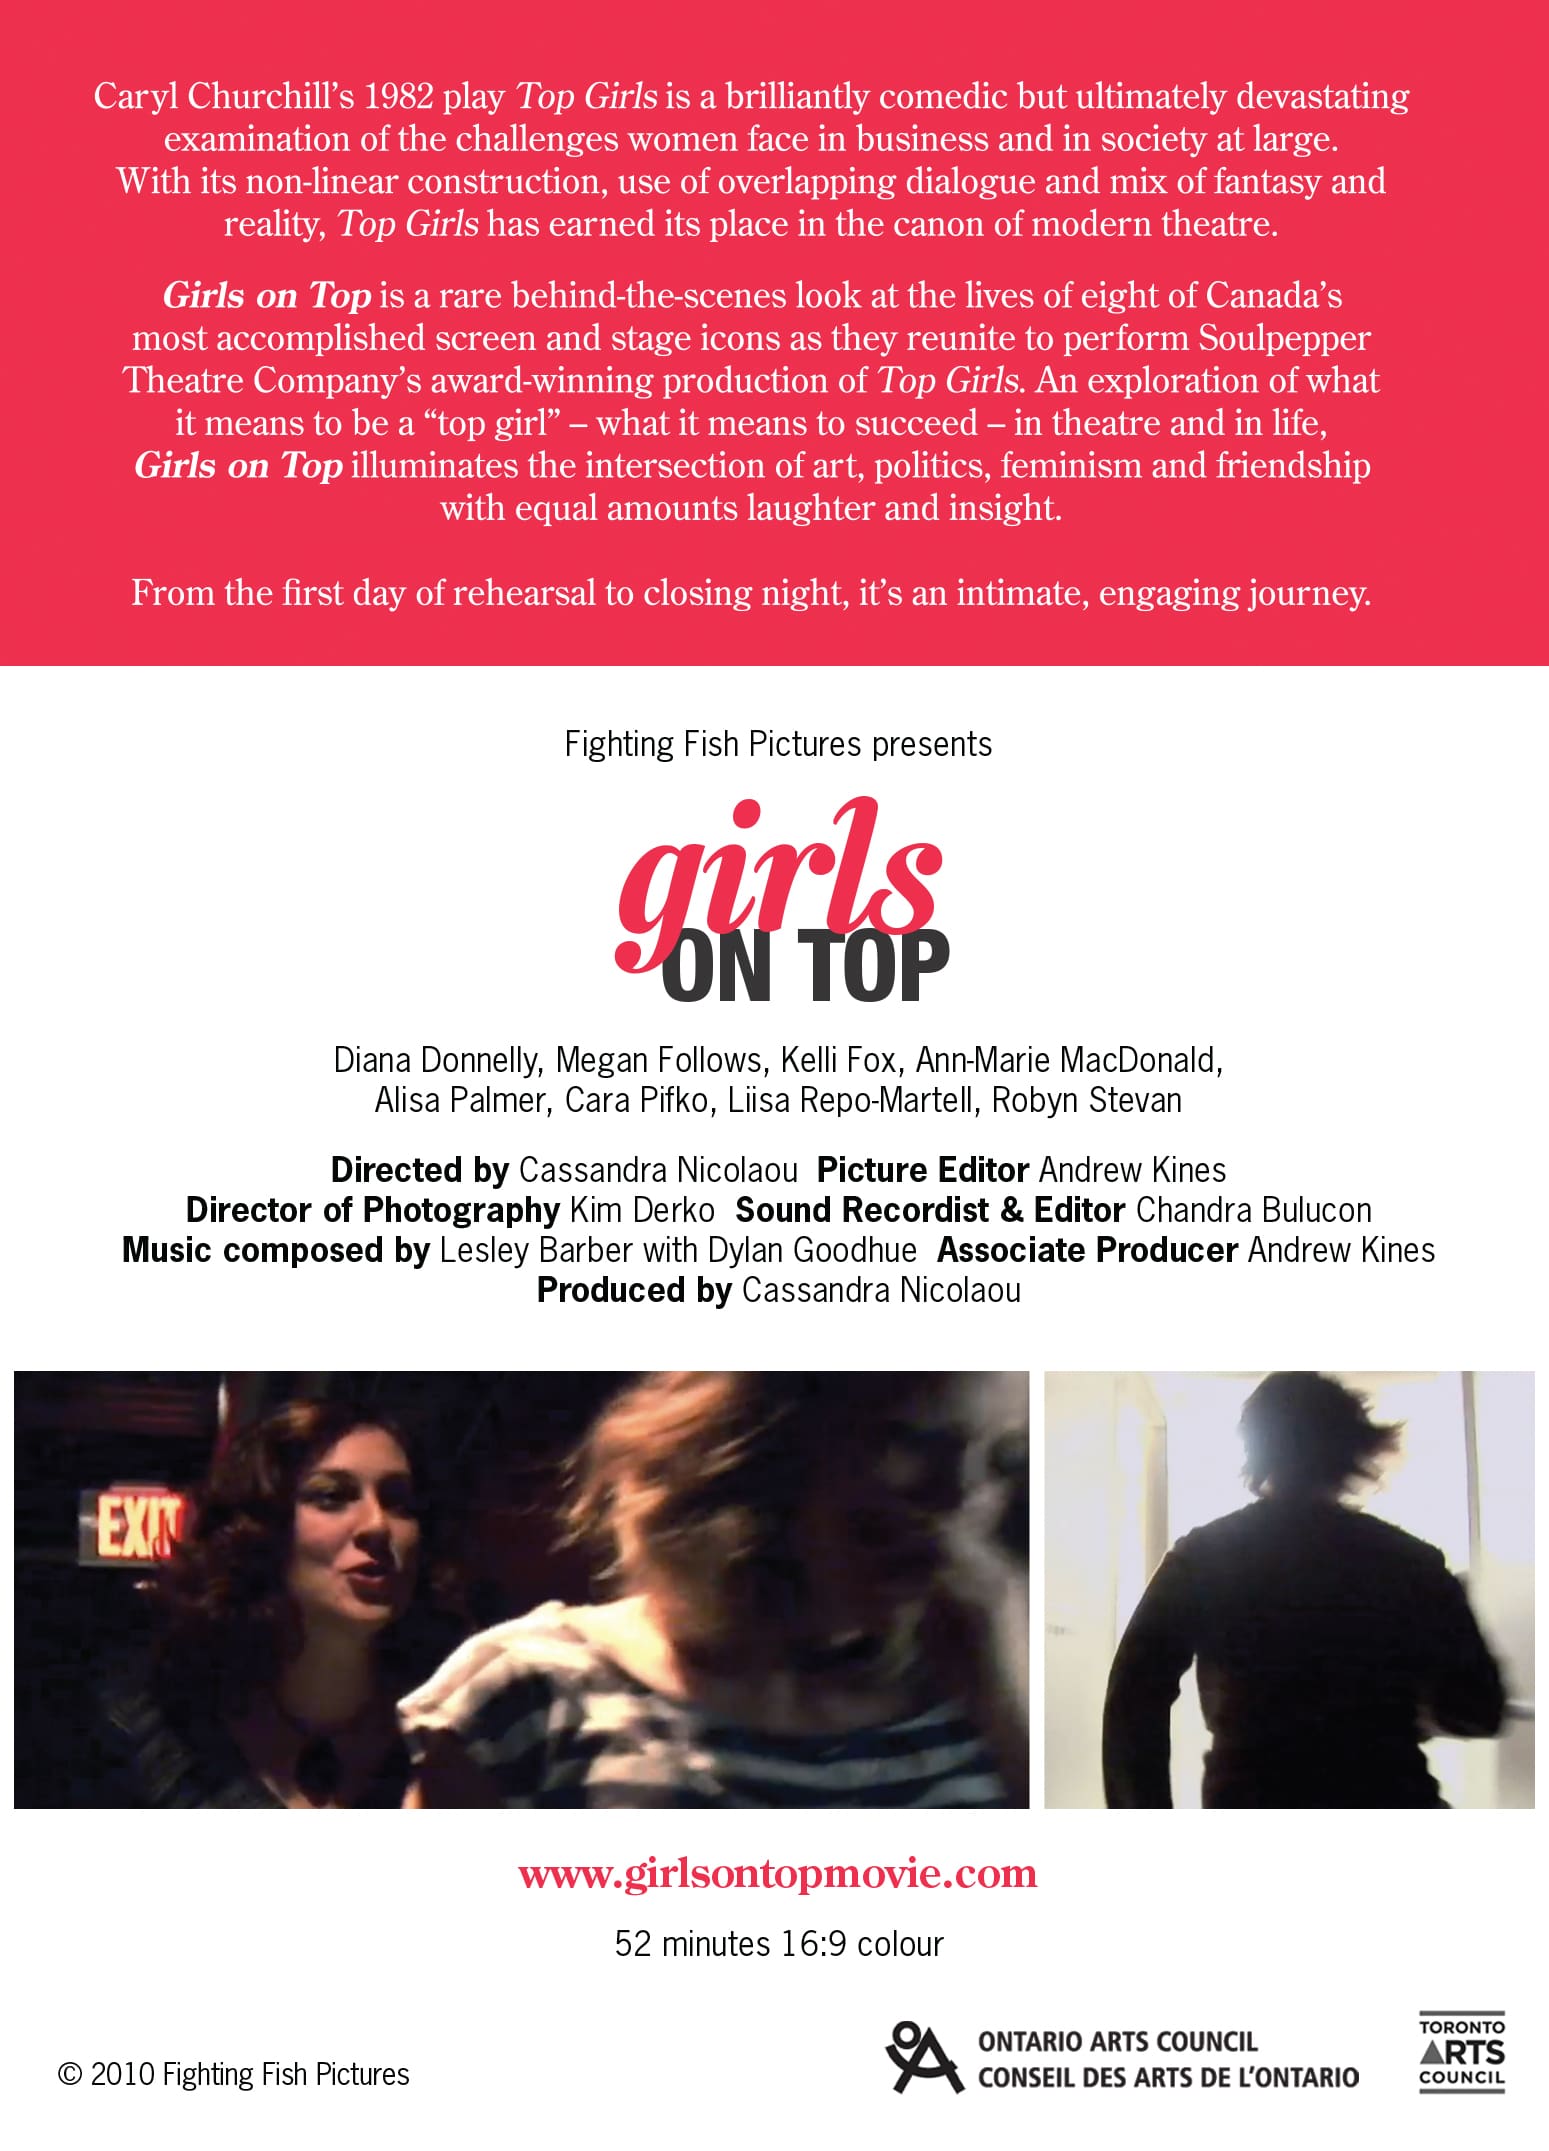 An image for Girls on Top documentary